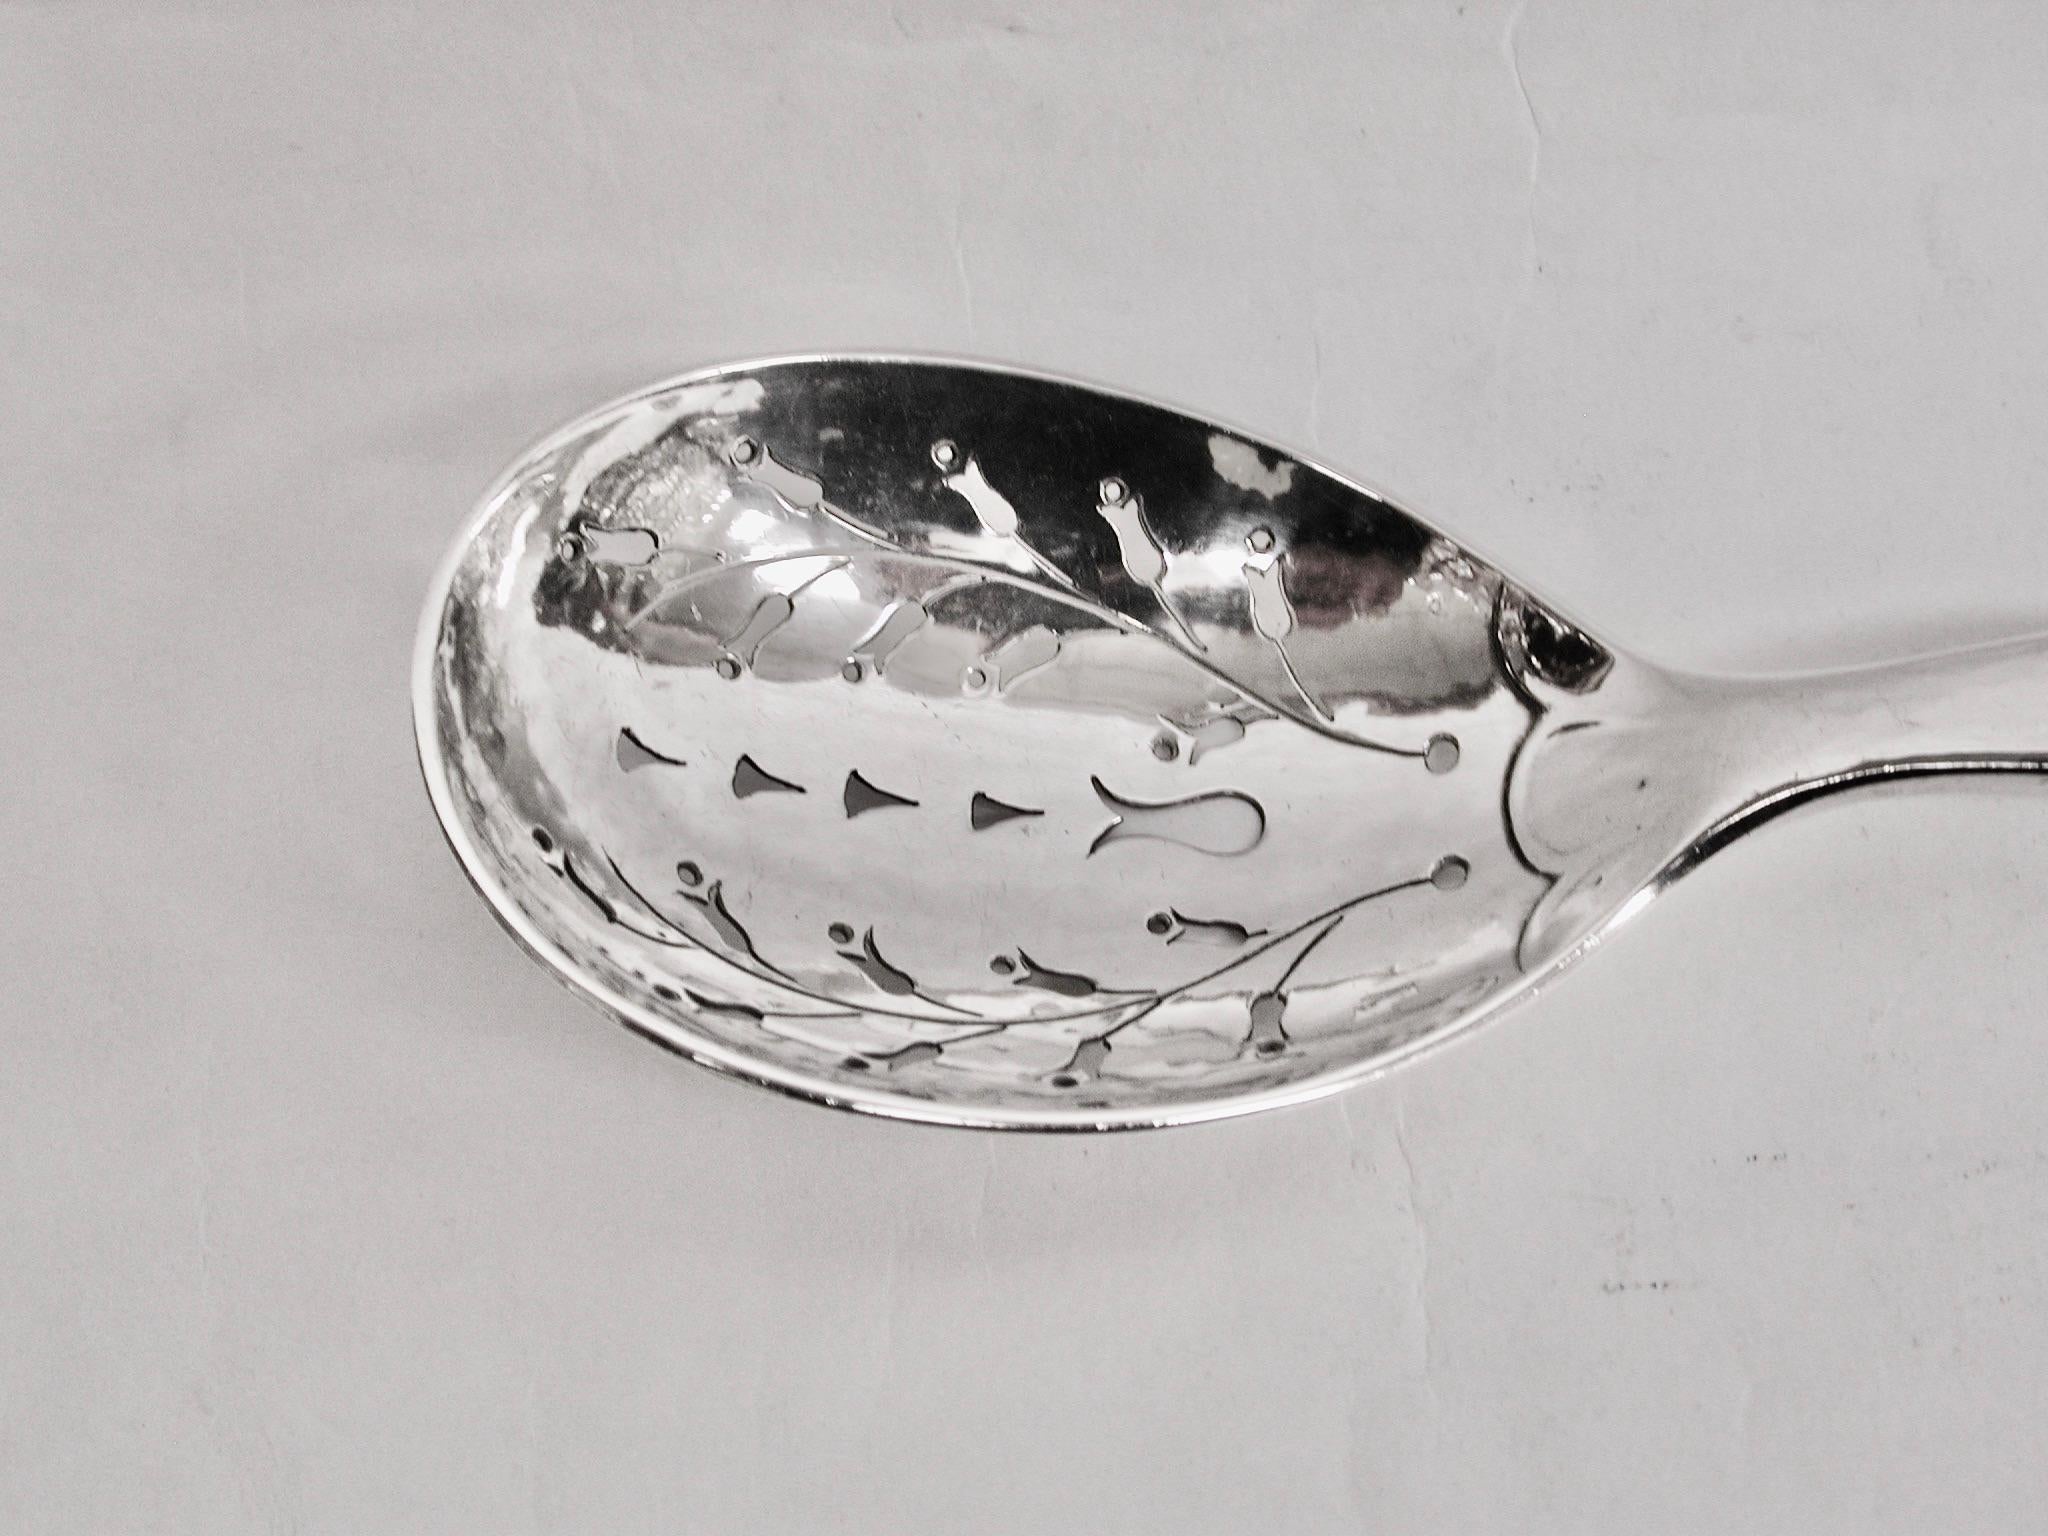 Georg Jensen Silver Hand Pierced Fruit Spoon Dated circa 1915, Pattern no 38
Made in Copenhagen,Denmark
This serving piece has a lovely weight, is 3.44 troy ounces and is hand wrought
with hand hammering and piercing.
It has built up a lovely